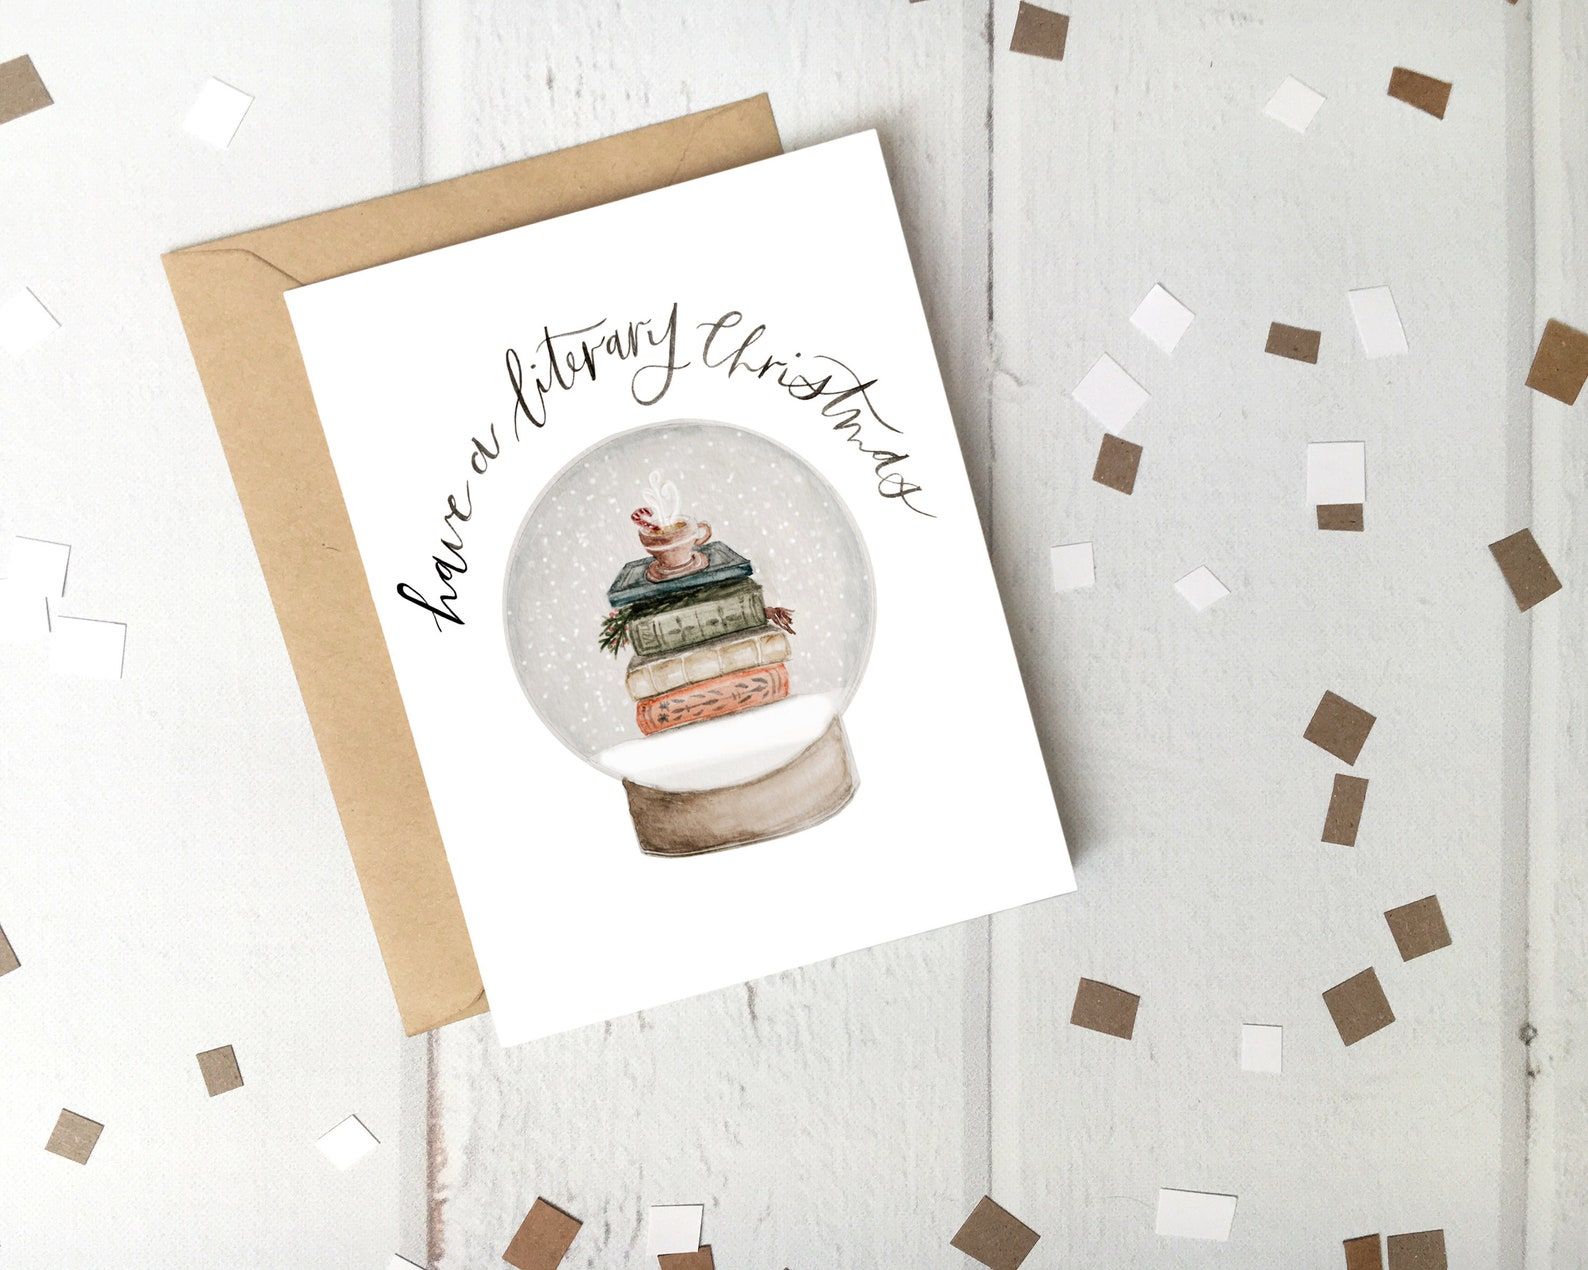 A white card reads "Have a literary Christmas" and depicts a snowglobe with a stack of books and a cup of hot cocoa inside.